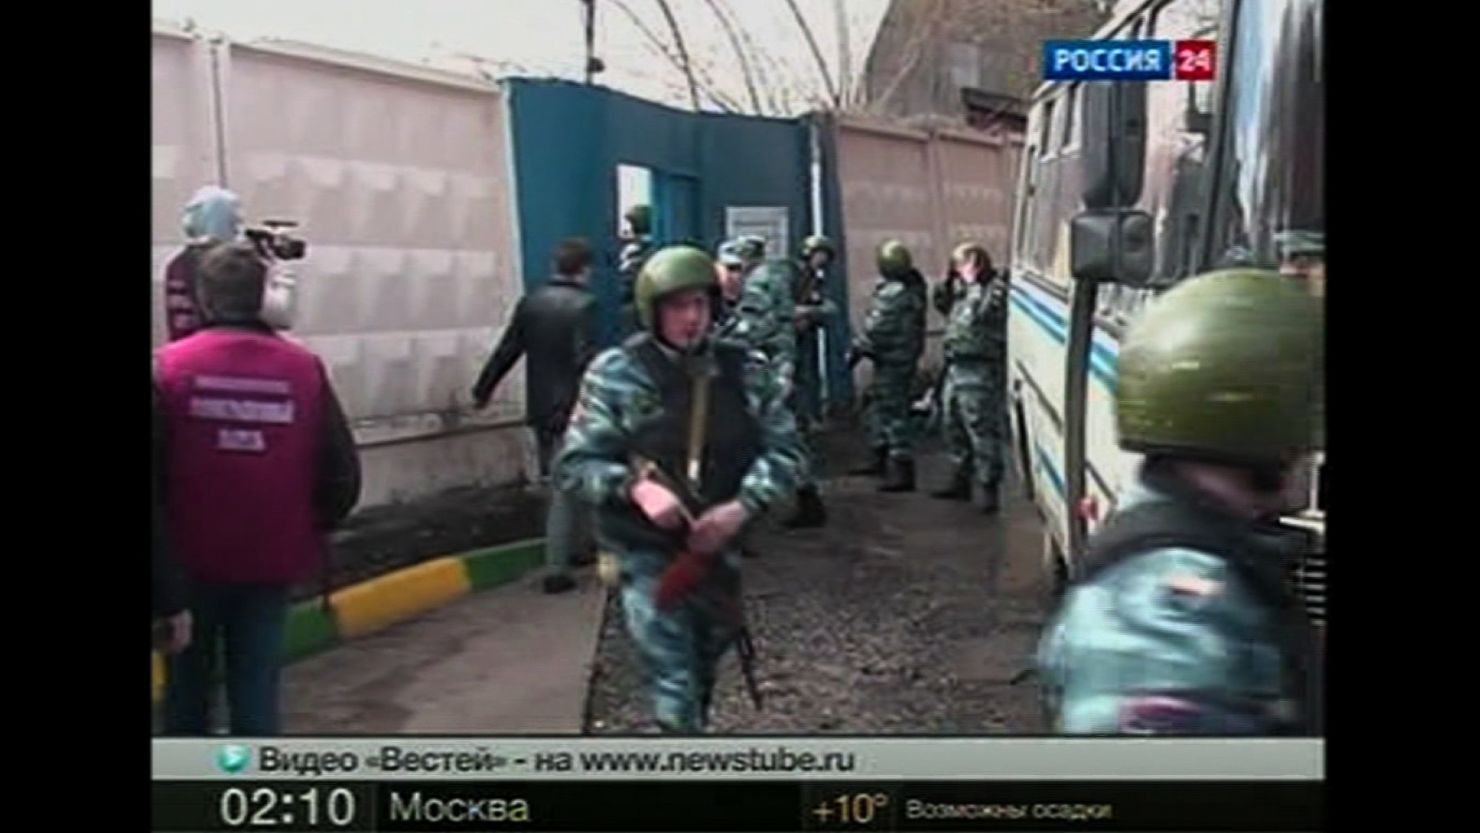 Members of Russia's Federal Security Service, or FSB, carried out the raid along with police.